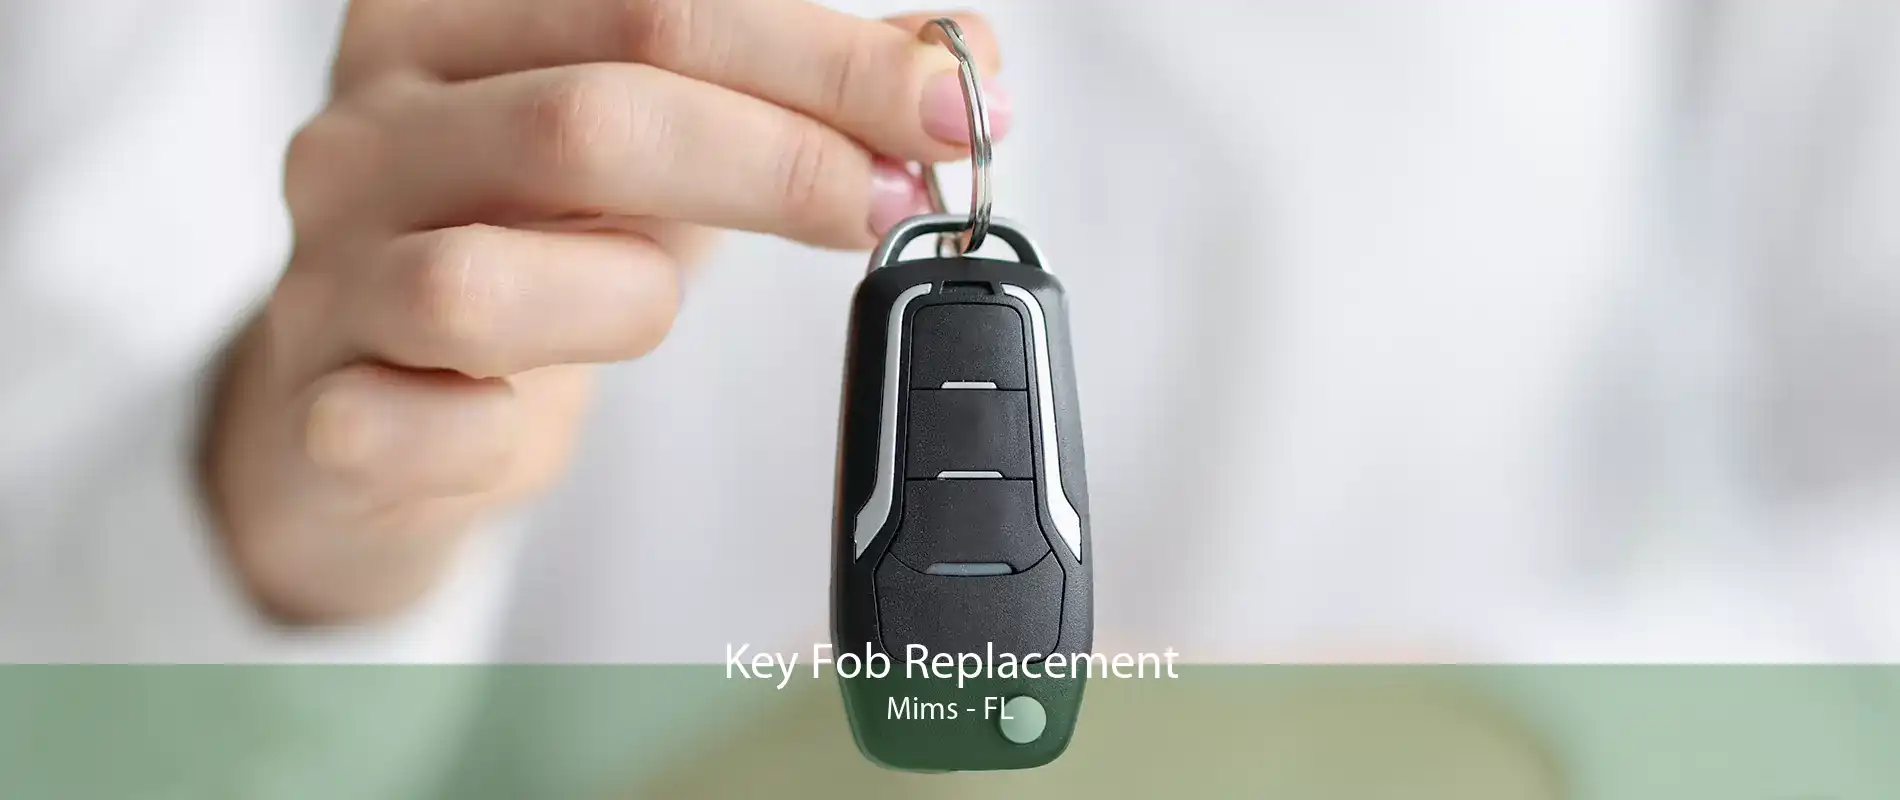 Key Fob Replacement Mims - FL